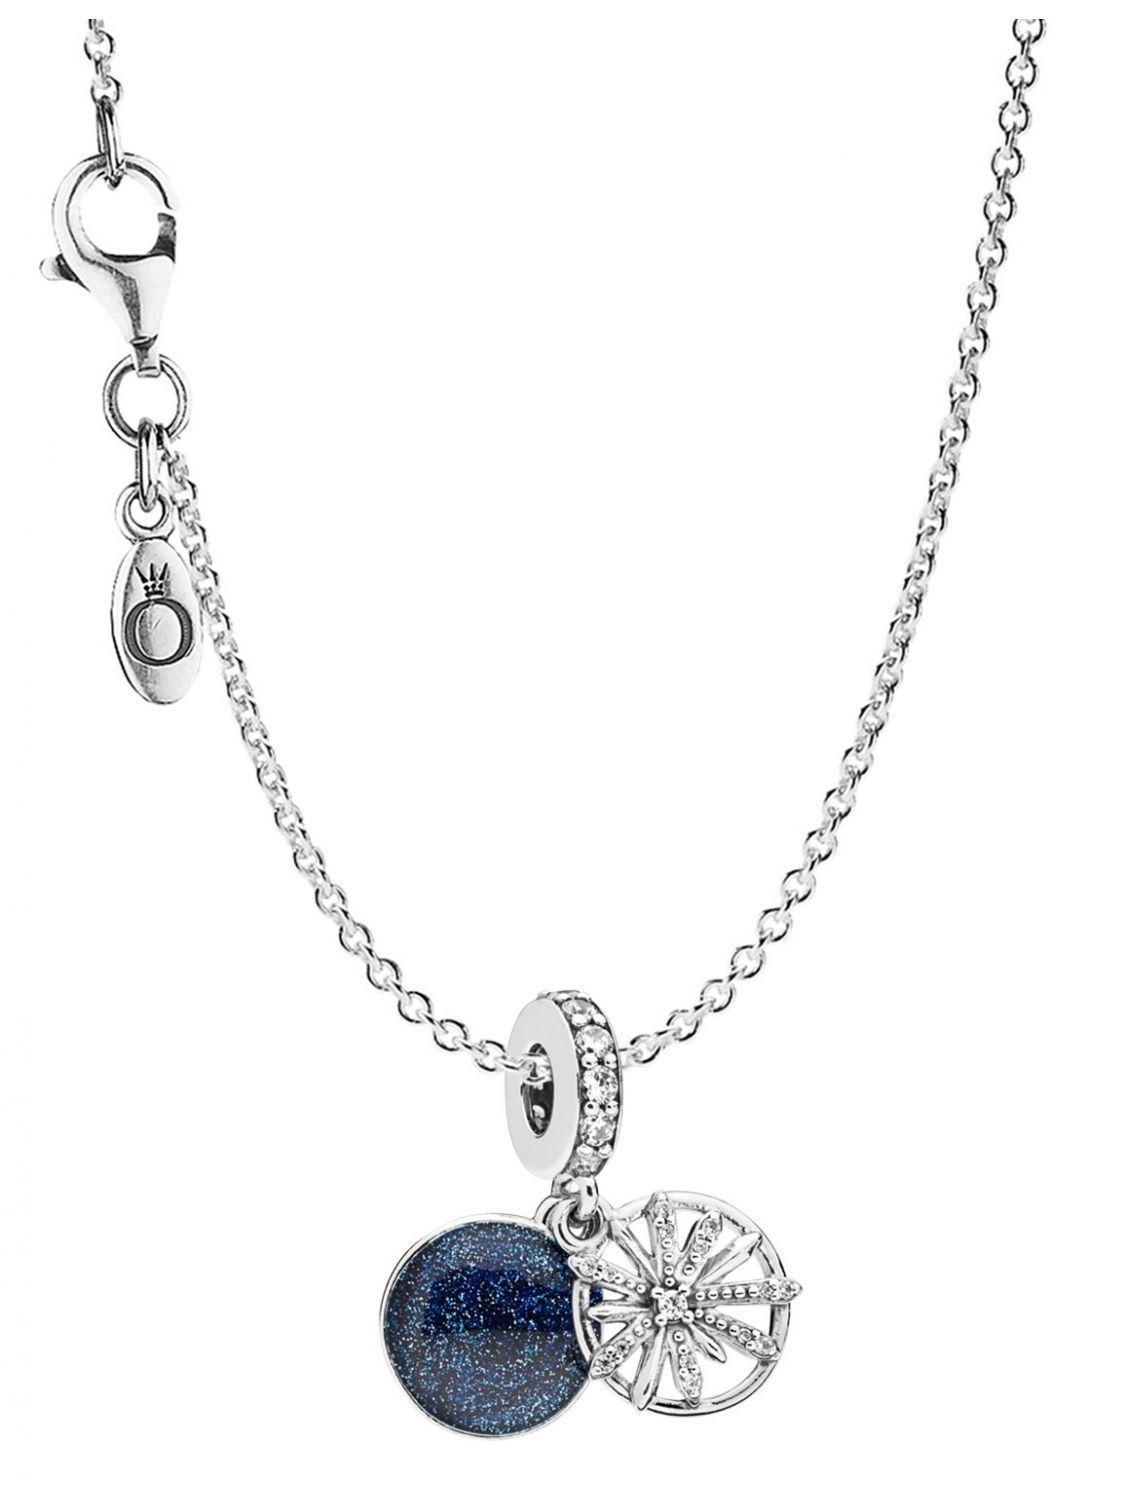 Pandora 08695 Necklace With Charm Dazzling Wishes Pertaining To Most Up To Date Dazzling Locket Pendant Necklaces (View 4 of 25)